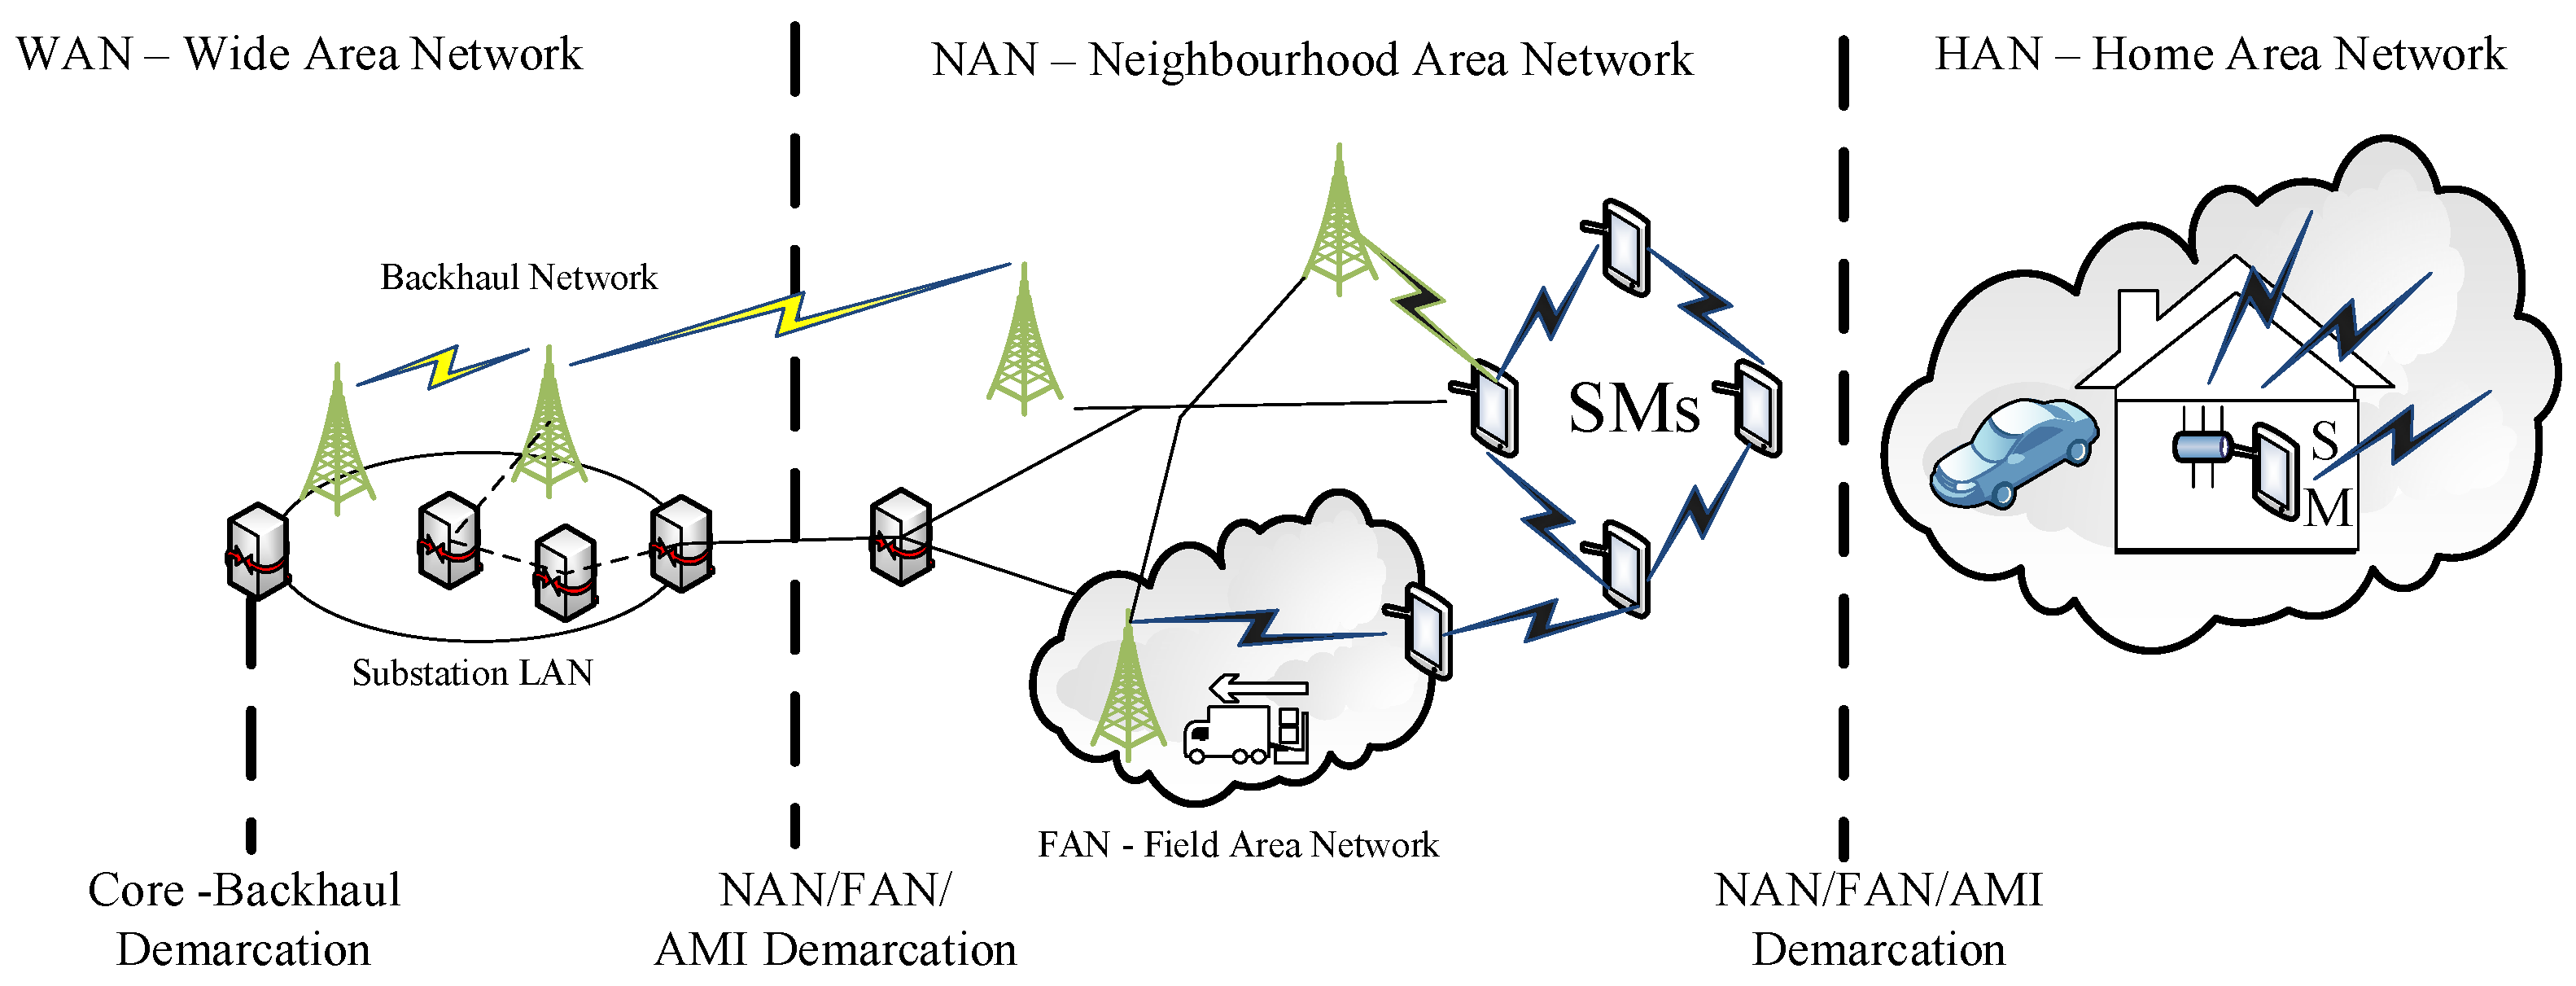 home area network images